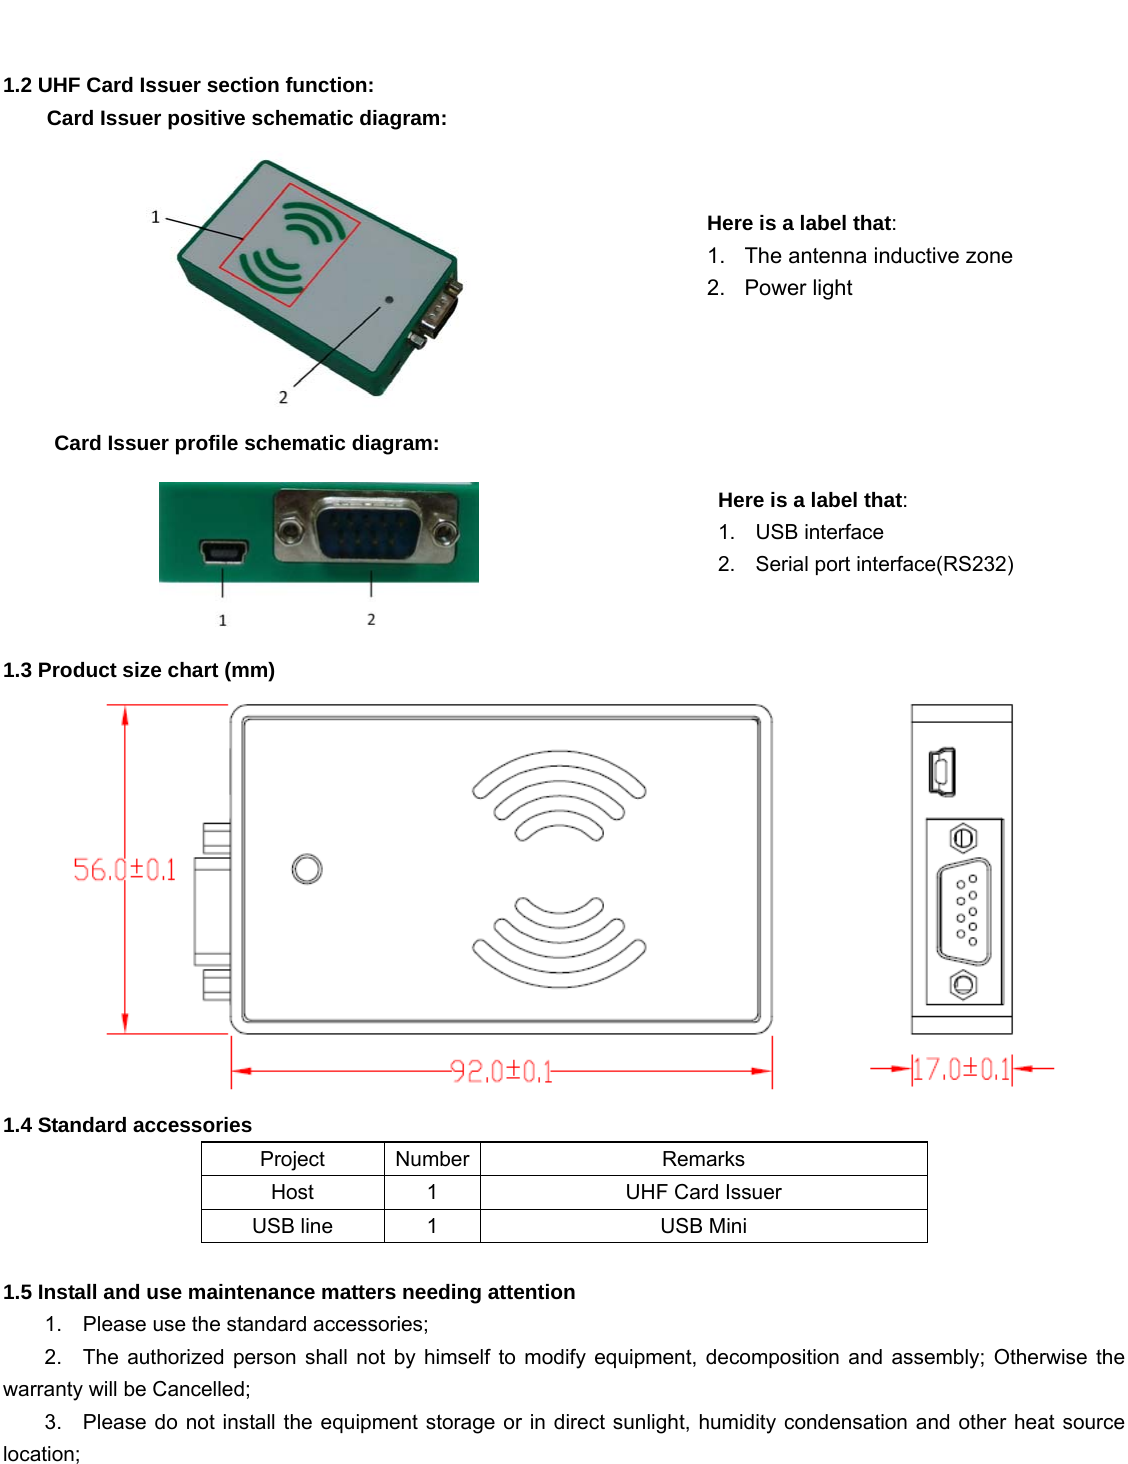     1.2 UHF Card Issuer section function:     Card Issuer positive schematic diagram:  Card Issuer profile schematic diagram:      1.3 Product size chart (mm)  1.4 Standard accessories Project Number Remarks Host 1  UHF Card Issuer USB line  1  USB Mini  1.5 Install and use maintenance matters needing attention 1.    Please use the standard accessories; 2.  The authorized person shall not by himself to modify equipment, decomposition and assembly; Otherwise the warranty will be Cancelled; 3.    Please do not install the equipment storage or in direct sunlight, humidity condensation and other heat source location;   Here is a label that: 1. USB interface 2.  Serial port interface(RS232) Here is a label that: 1.  The antenna inductive zone 2. Power light 